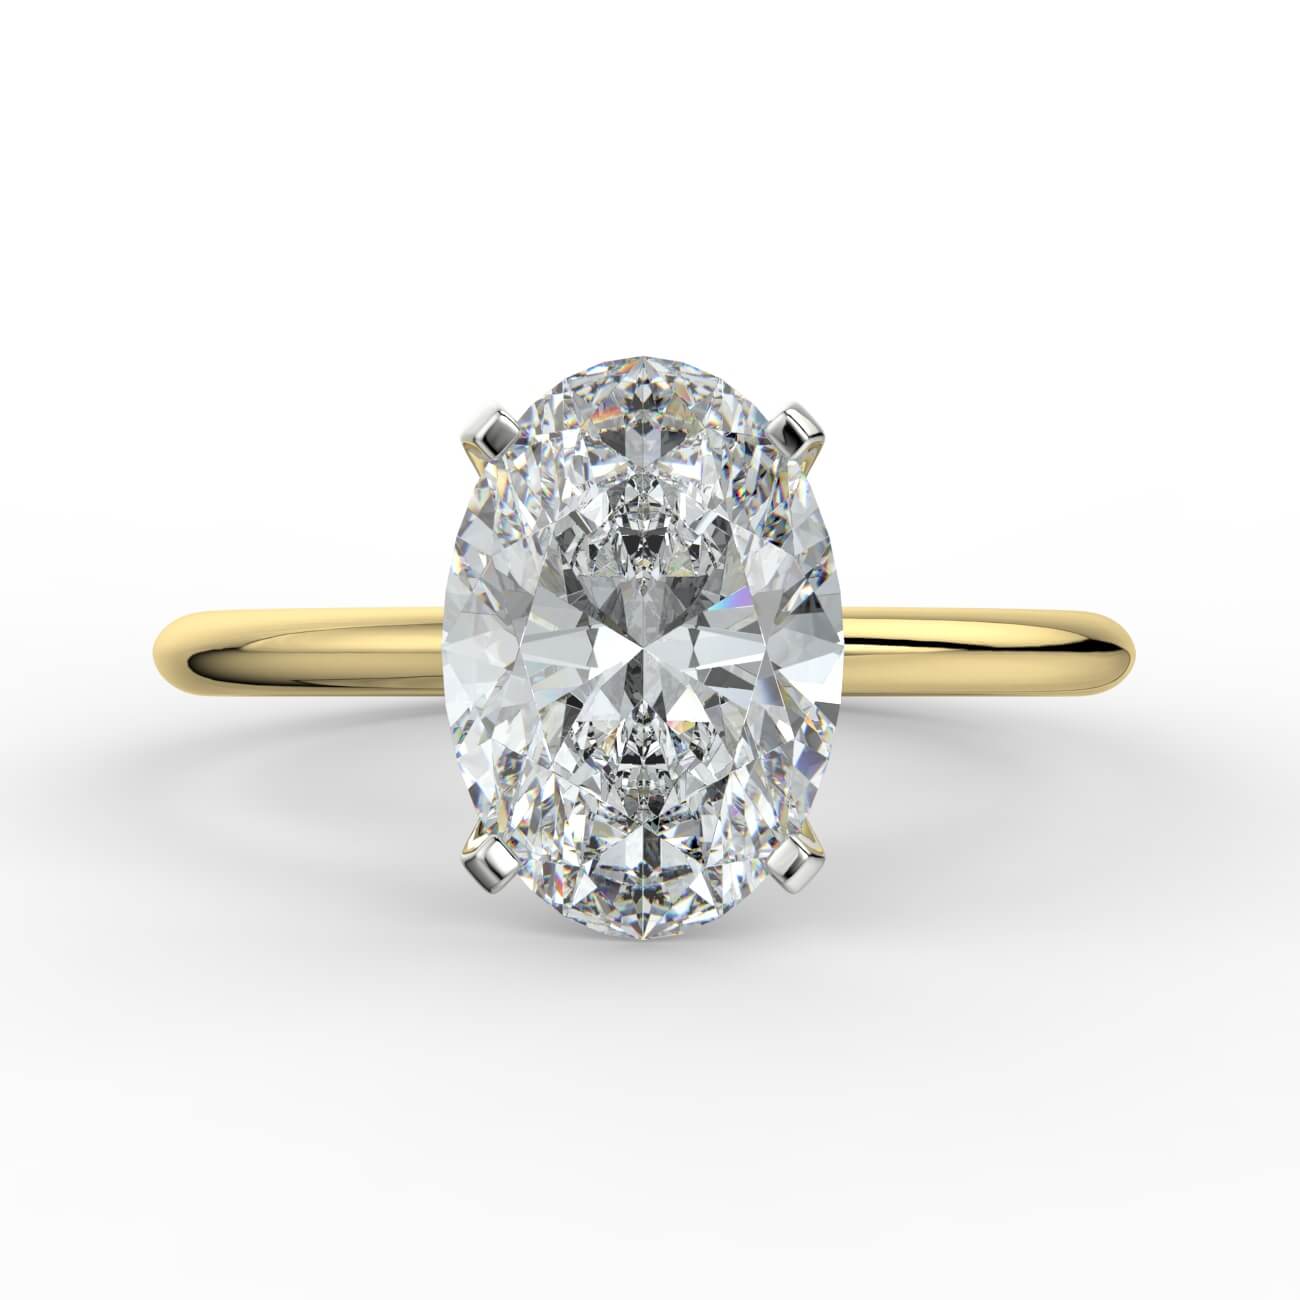 oval shape diamond solitaire ring in white and yellow gold - Australian Diamond Network